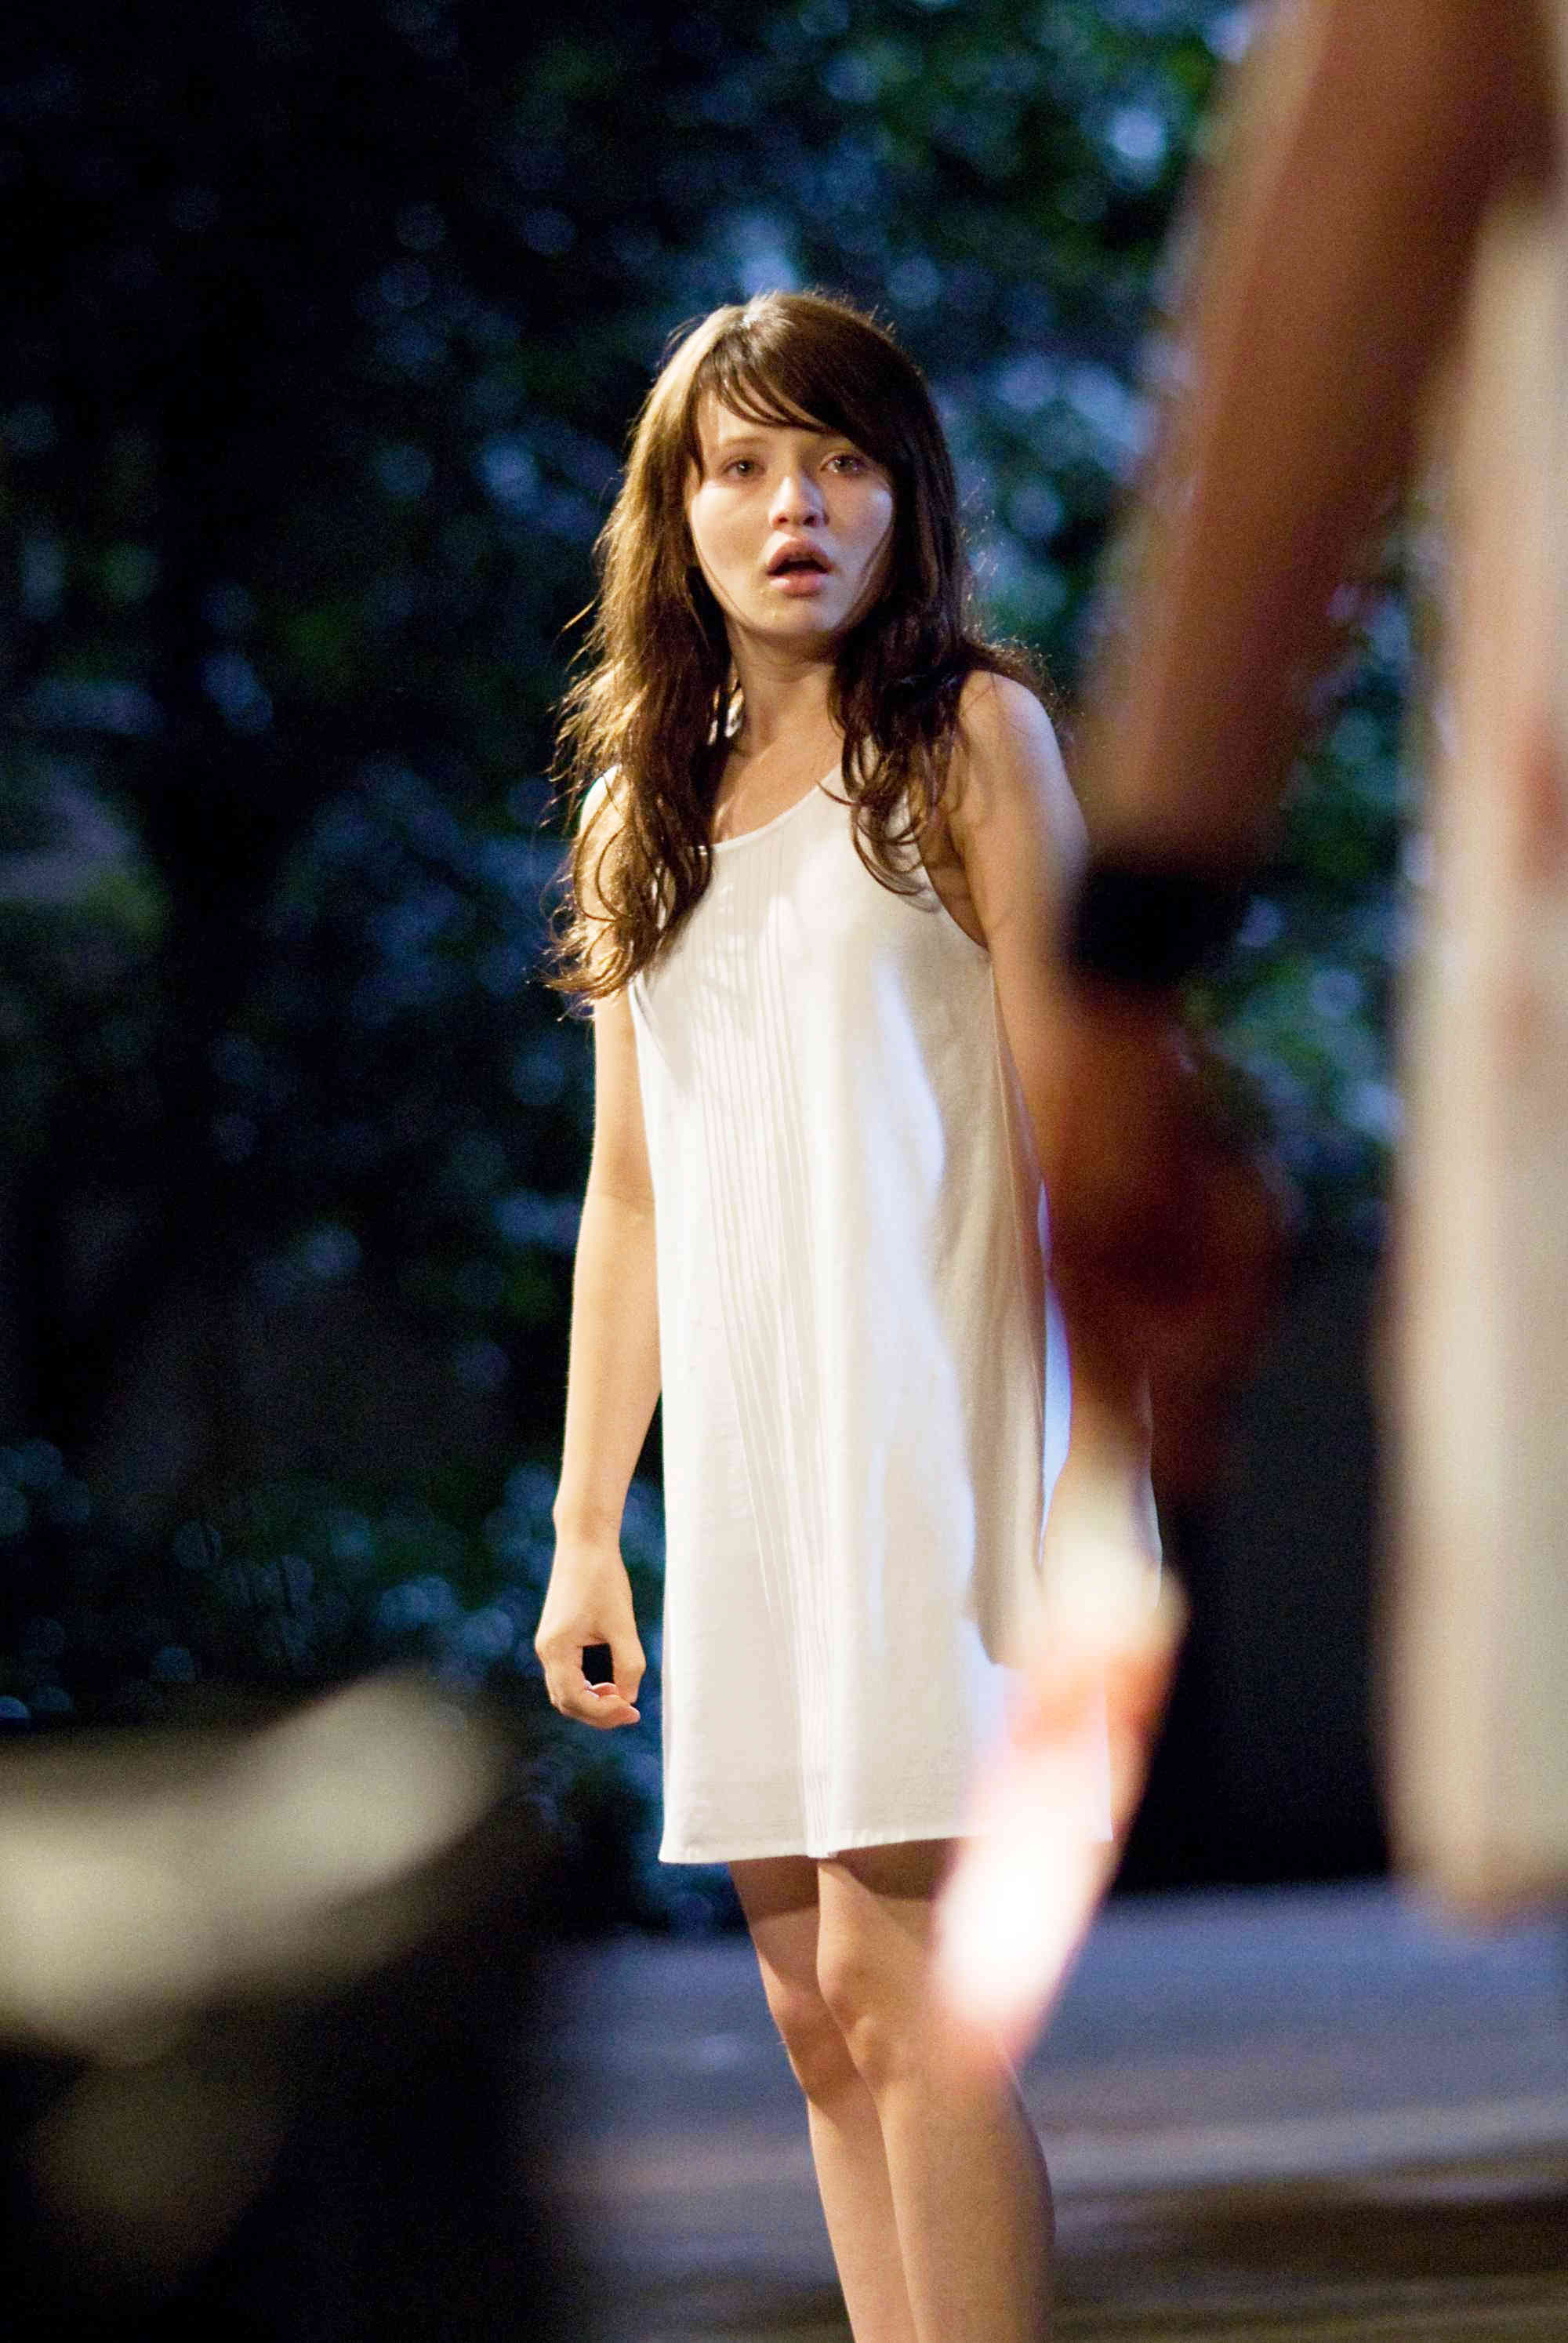 Emily Browning stars as Anna in DreamWorks' The Uninvited (2009). Photo credit by Kimberley French.